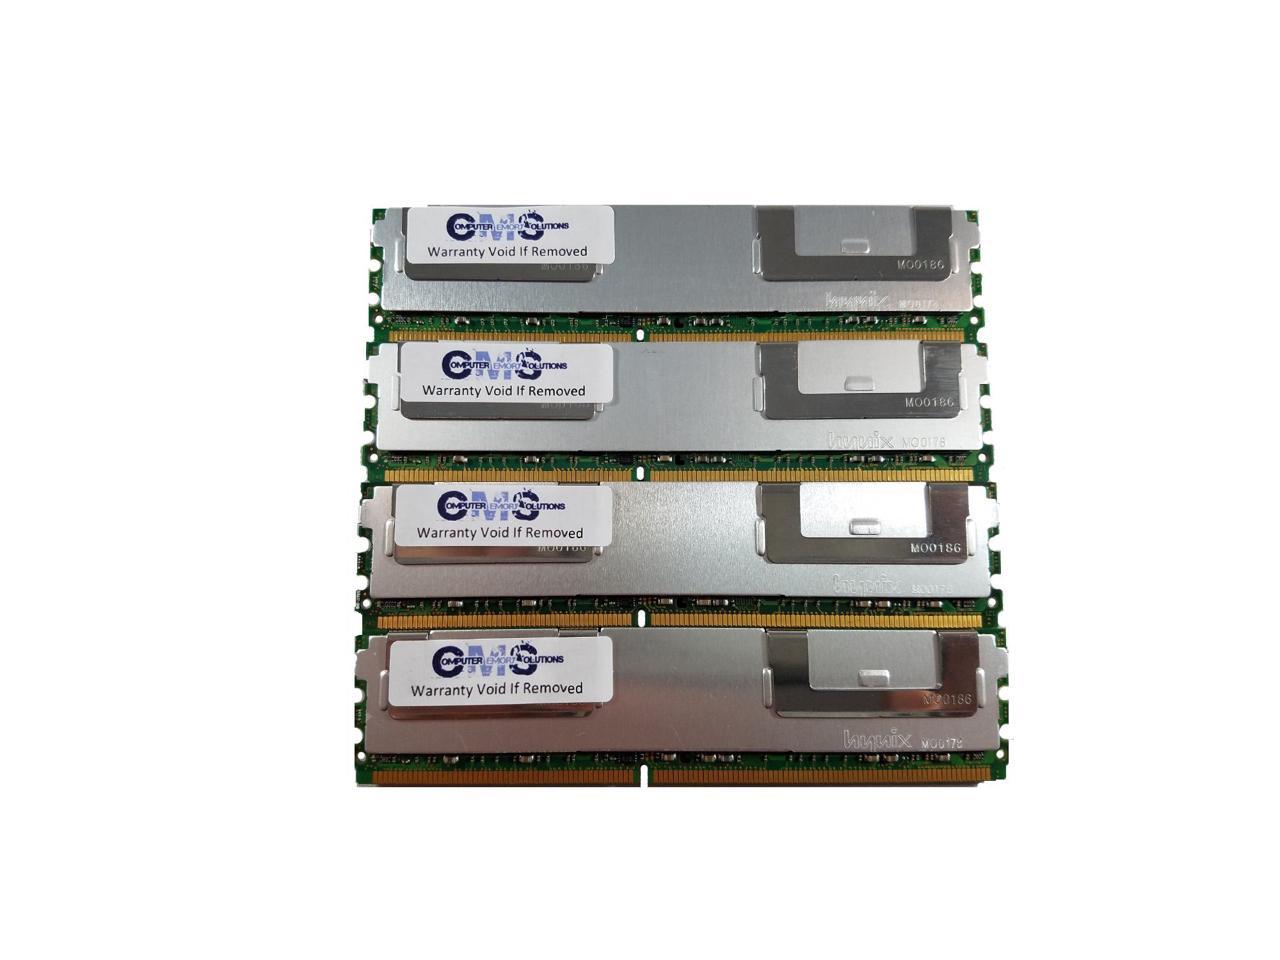 PC2-5300 2GB DDR2-667 RAM Memory Upgrade for The IBM System X 3500 Series x3500 